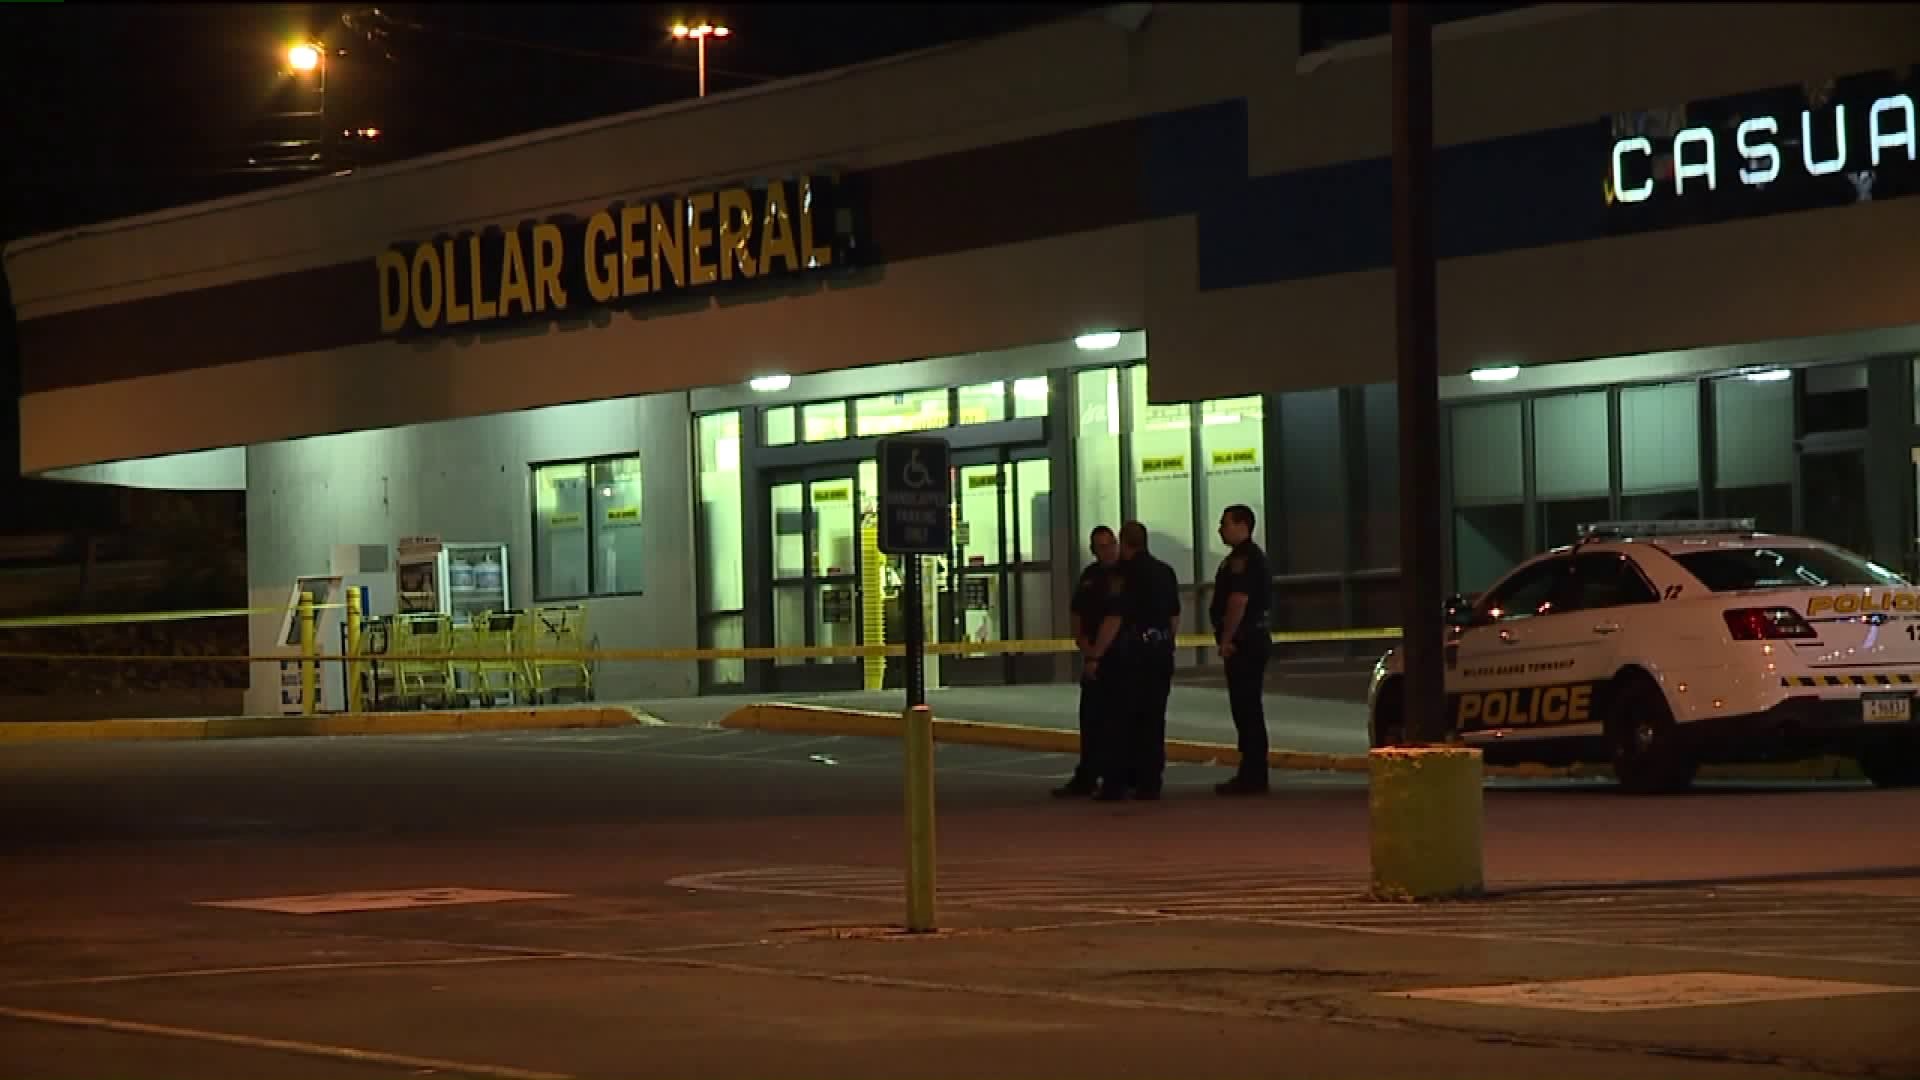 Police Investigate Reported Robbery at Dollar General in Luzerne County